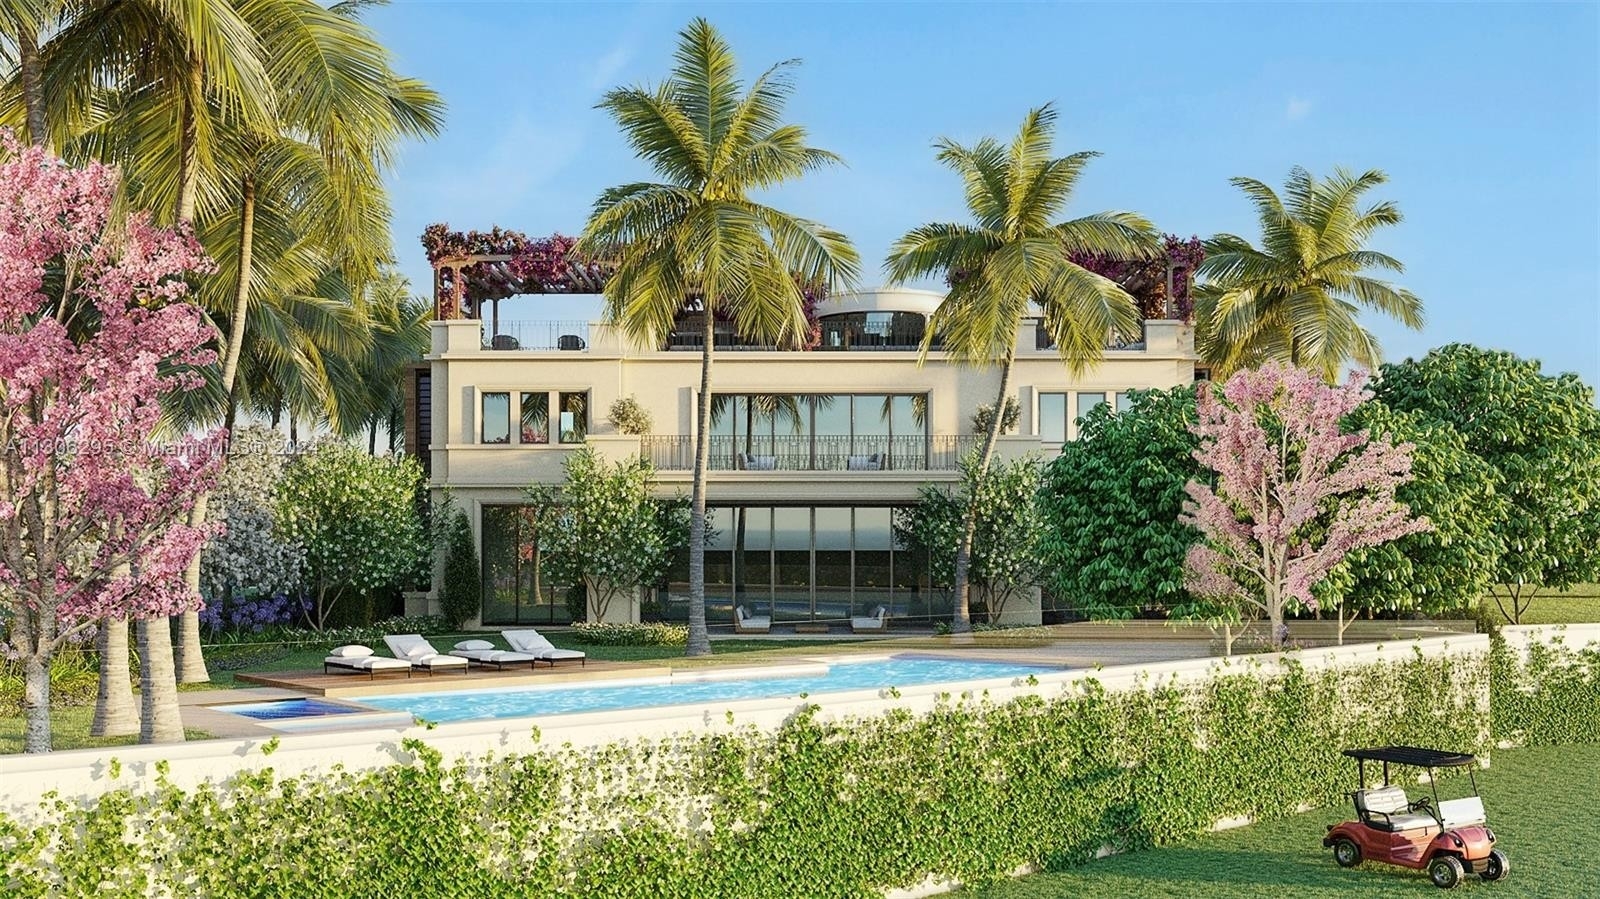 Single Family Home for Sale at Fisher Island, FL 33109